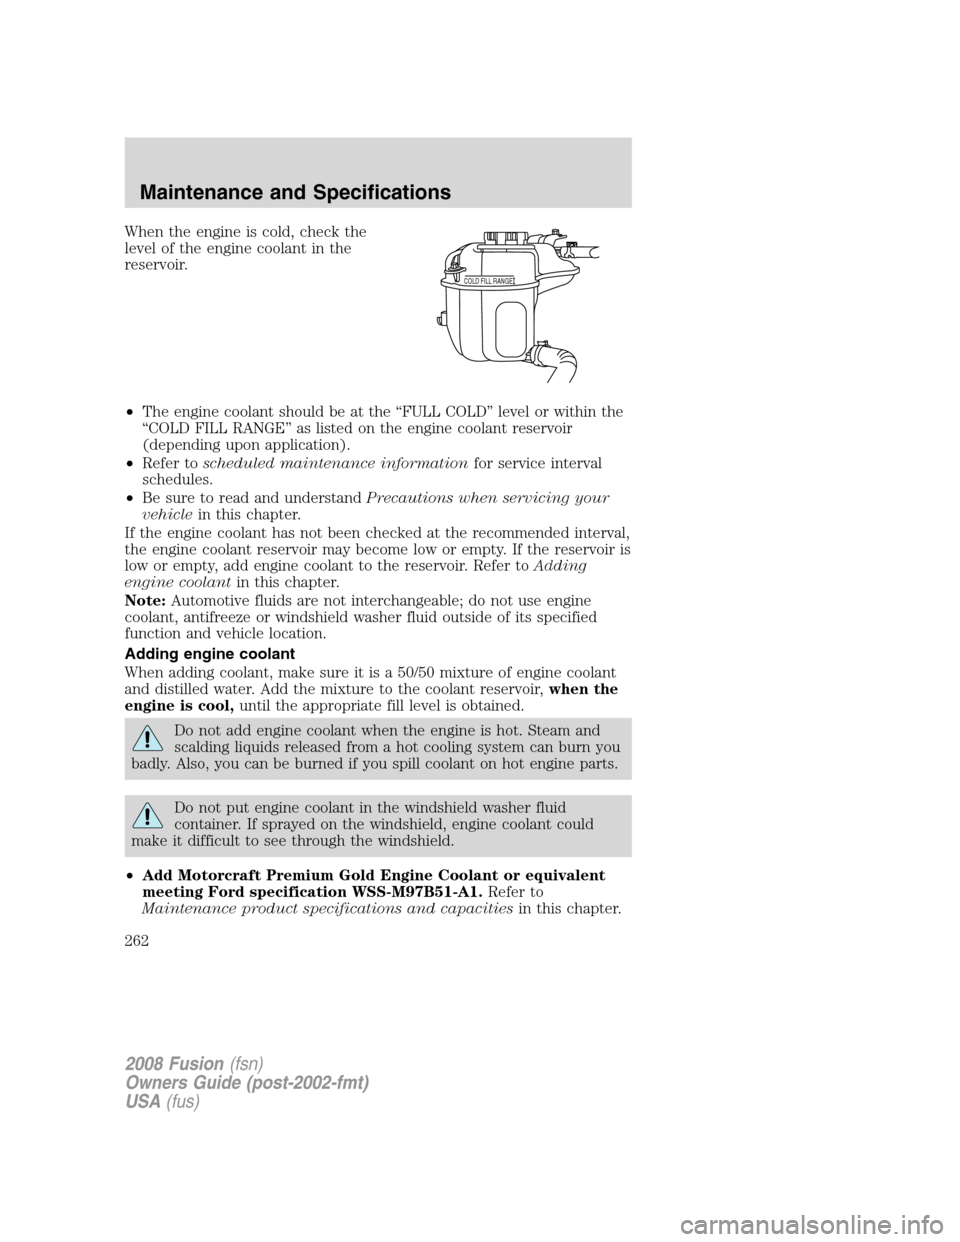 FORD FUSION (AMERICAS) 2008 1.G Owners Manual When the engine is cold, check the
level of the engine coolant in the
reservoir.
•The engine coolant should be at the “FULL COLD” level or within the
“COLD FILL RANGE” as listed on the engin